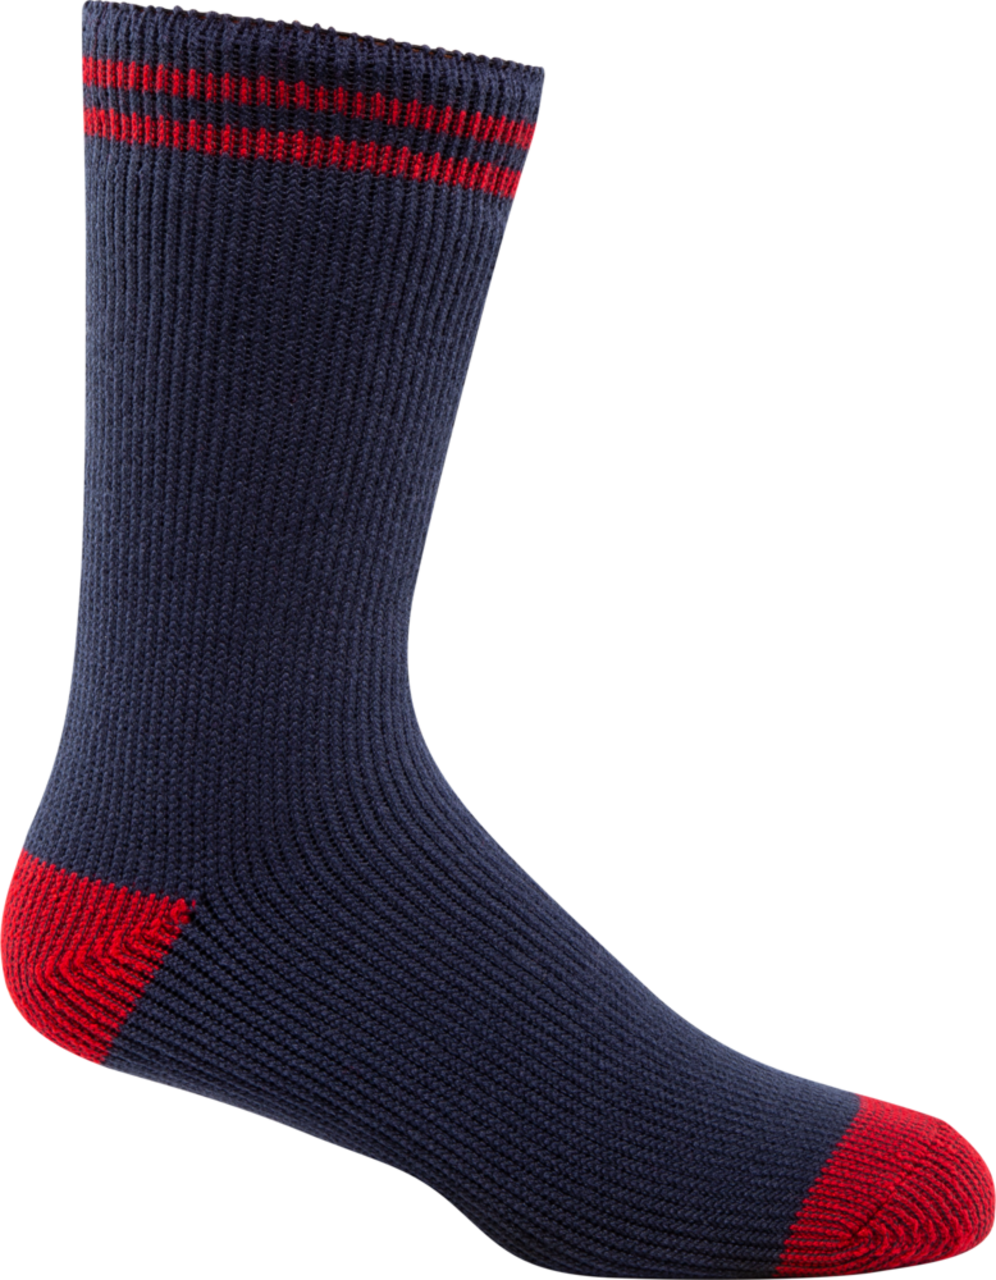 Best Deal in Canada  Mens Thermal Socks 3Pk Sz 7-11 - Asst - Canada's best  deals on Electronics, TVs, Unlocked Cell Phones, Macbooks, Laptops, Kitchen  Appliances, Toys, Bed and Bathroom products